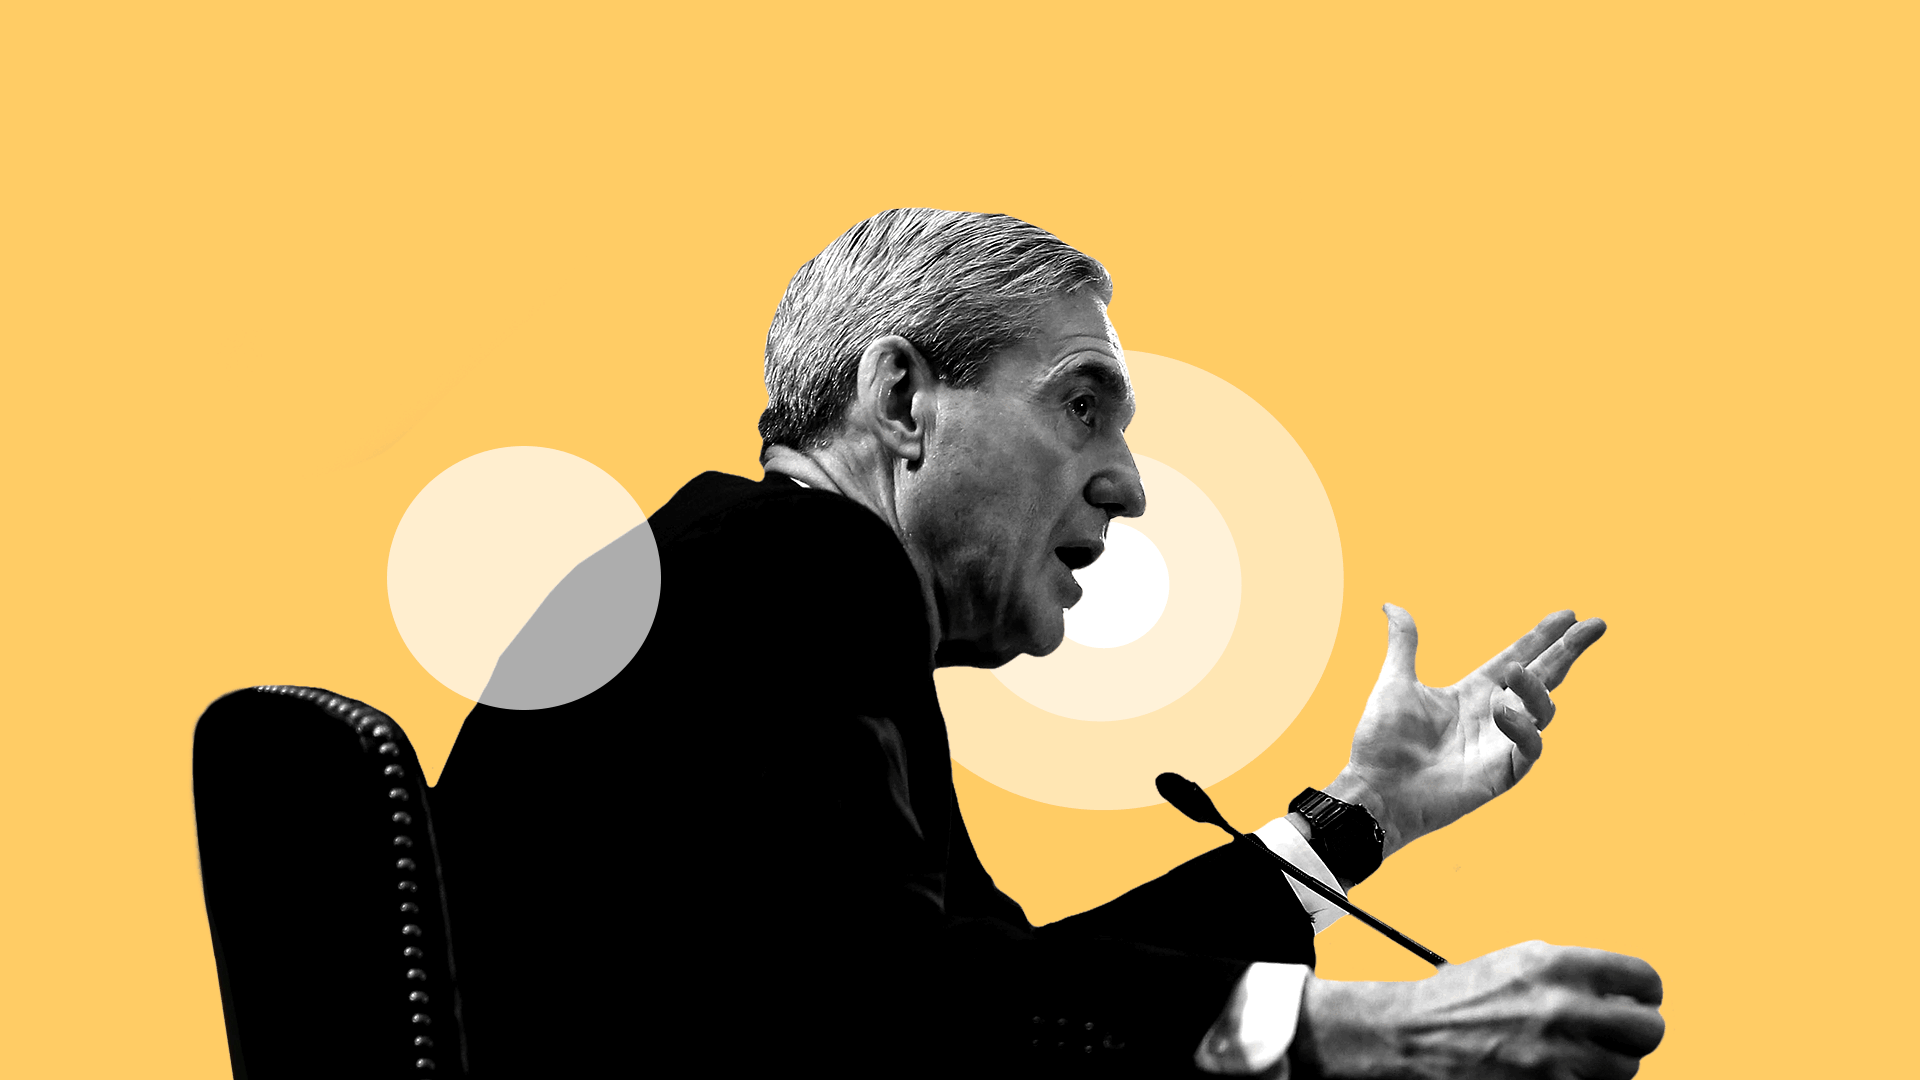 Illustration of Robert Mueller with the area around his mouth called out by vector art circles